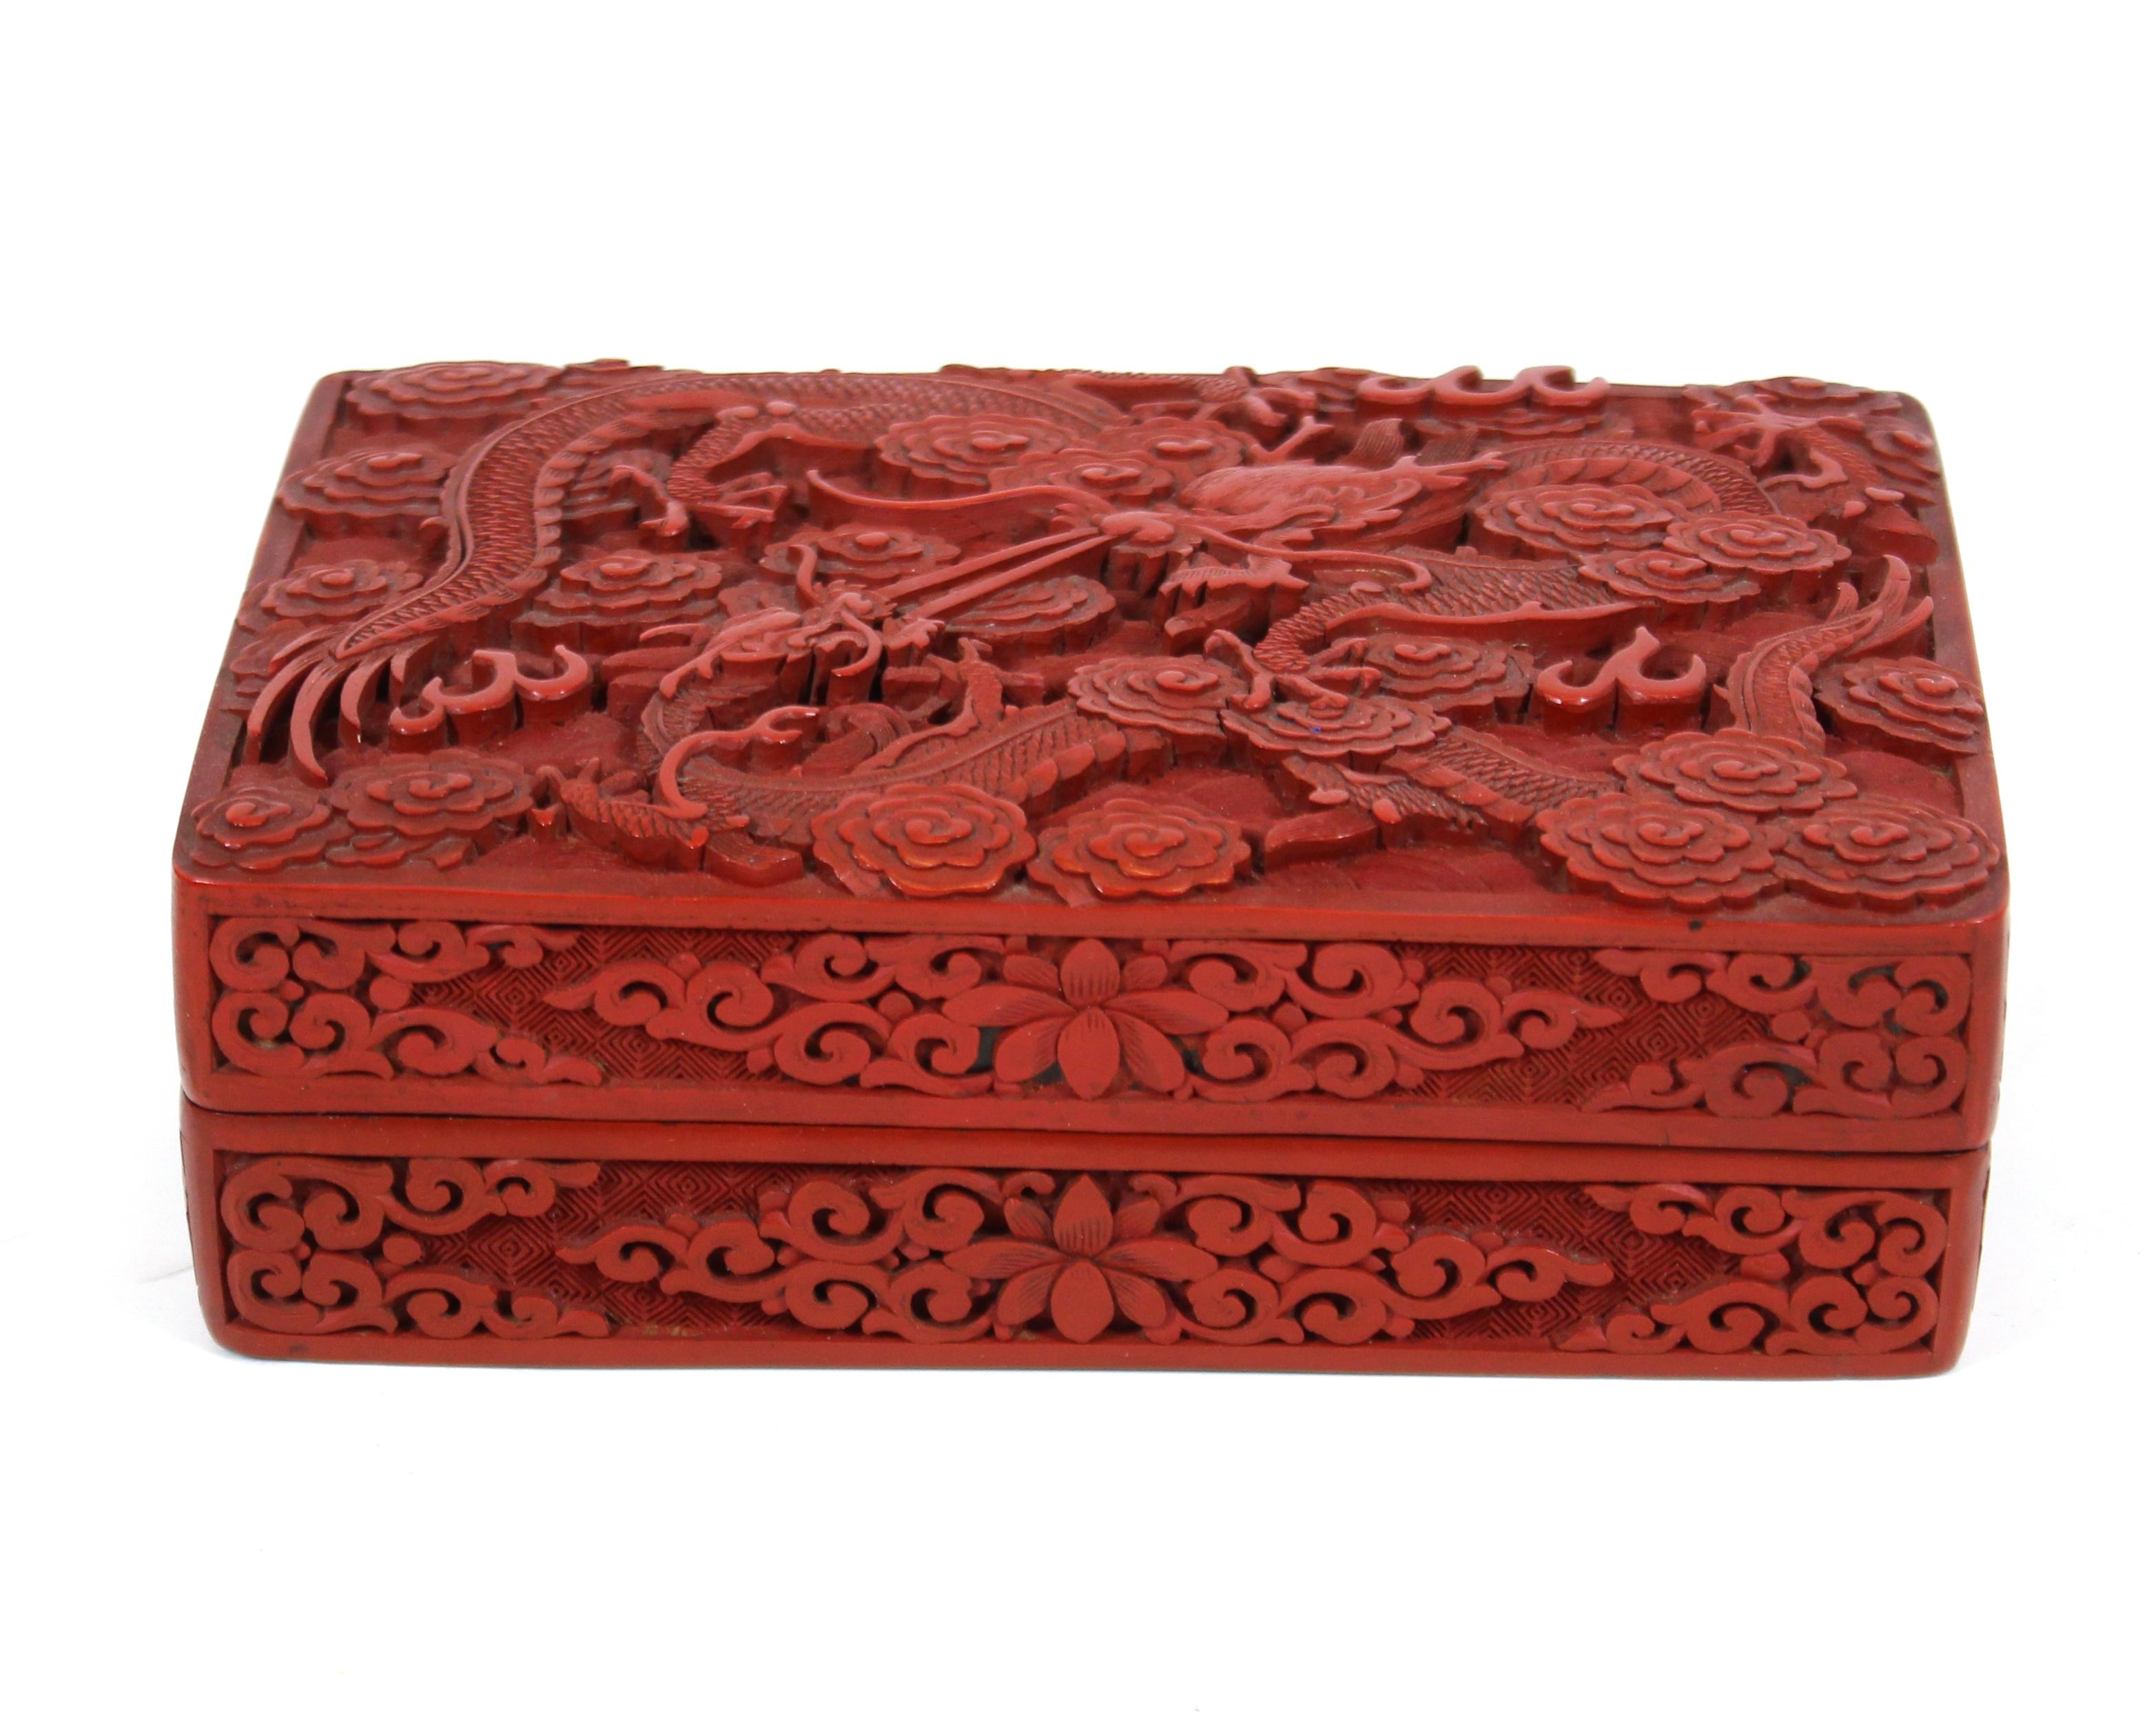 Chinese rectangular hand carved cinnabar bow with dragon motif on the lid. The piece was made in China circa 1900 and has a red exterior and a black lacquered interior. In great antique condition with age-appropriate wear and use.